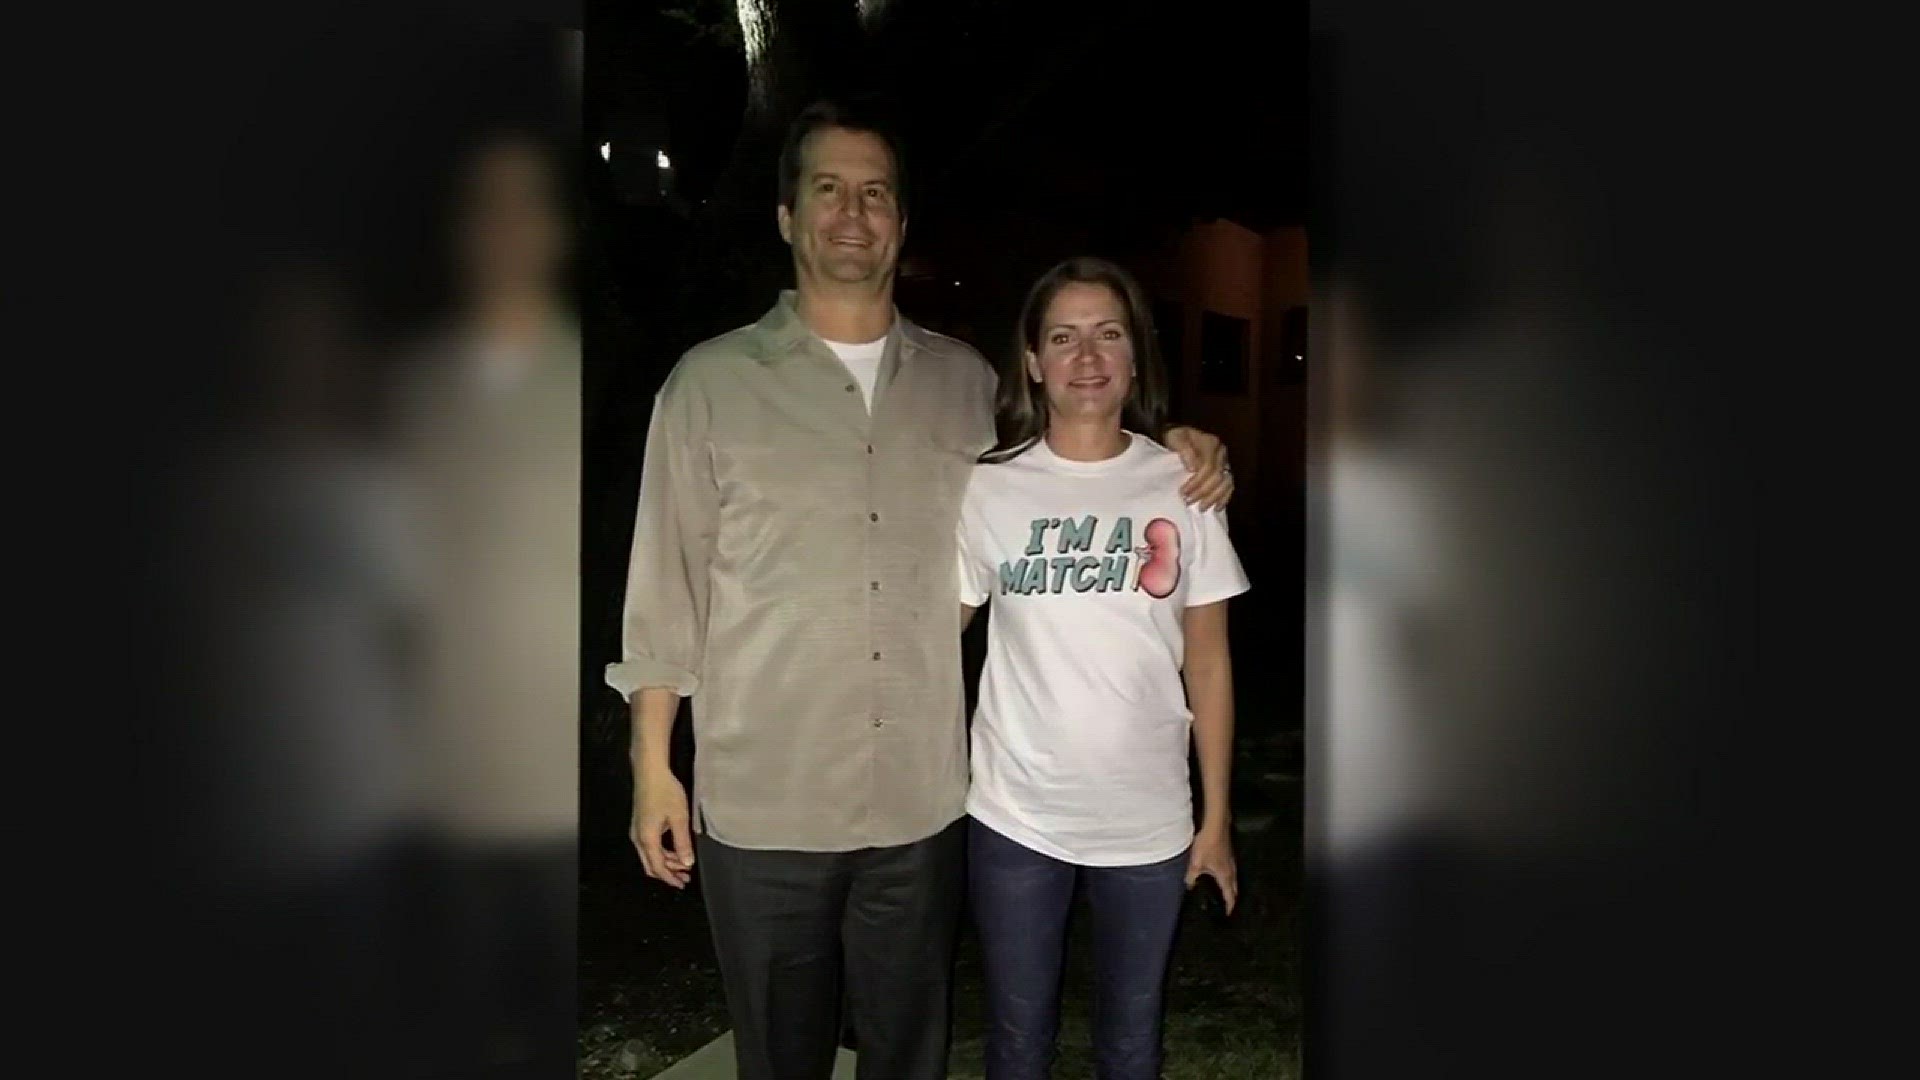 Mother of four donates kidney to stranger (This video first appeared on KVUE on July 20, 2015.)